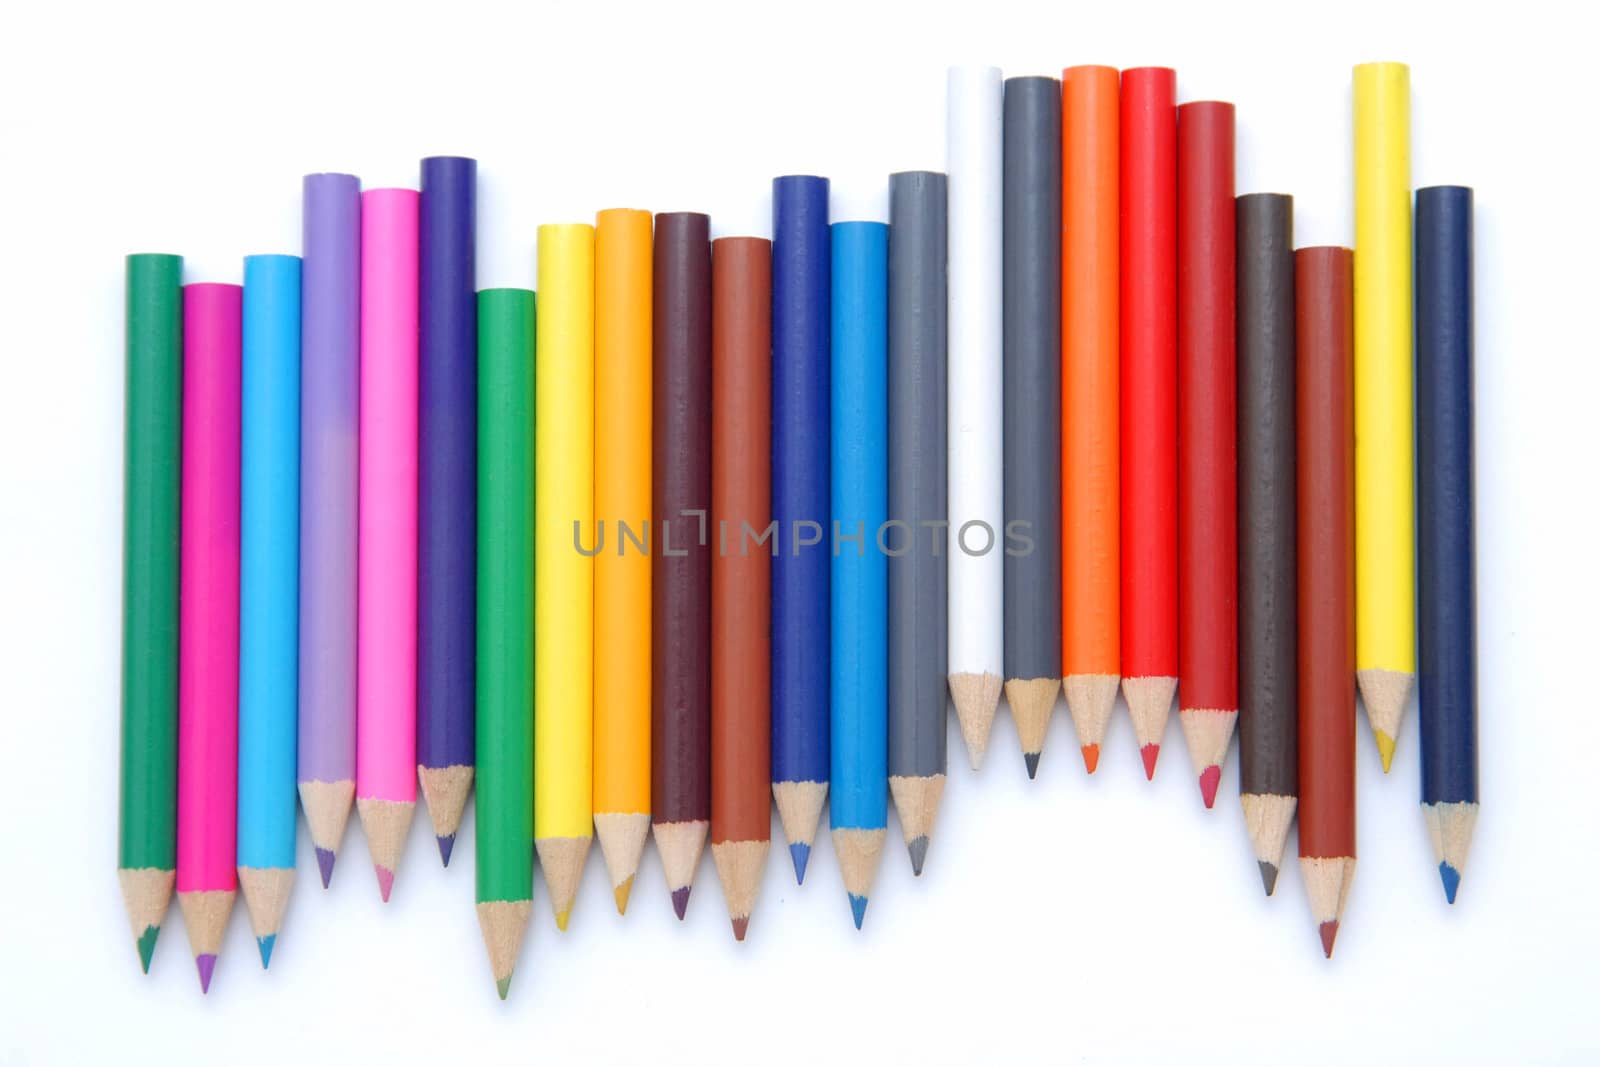 Colorful pencils by Yaurinko